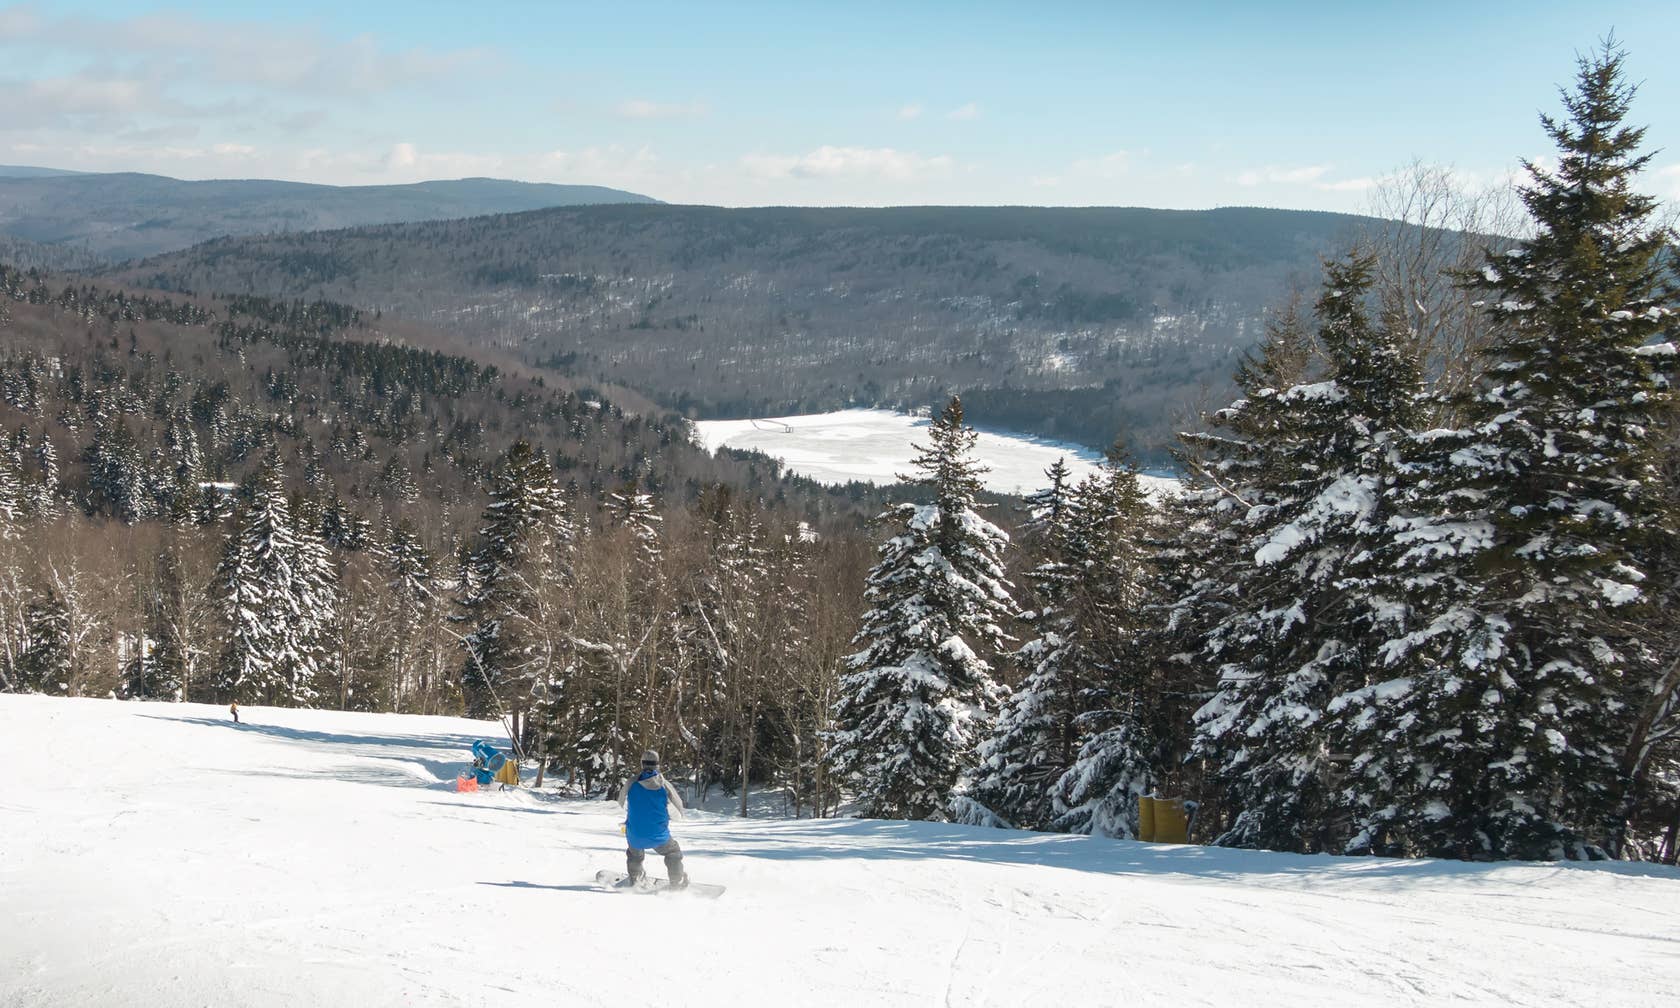 Holiday rentals in Snowshoe